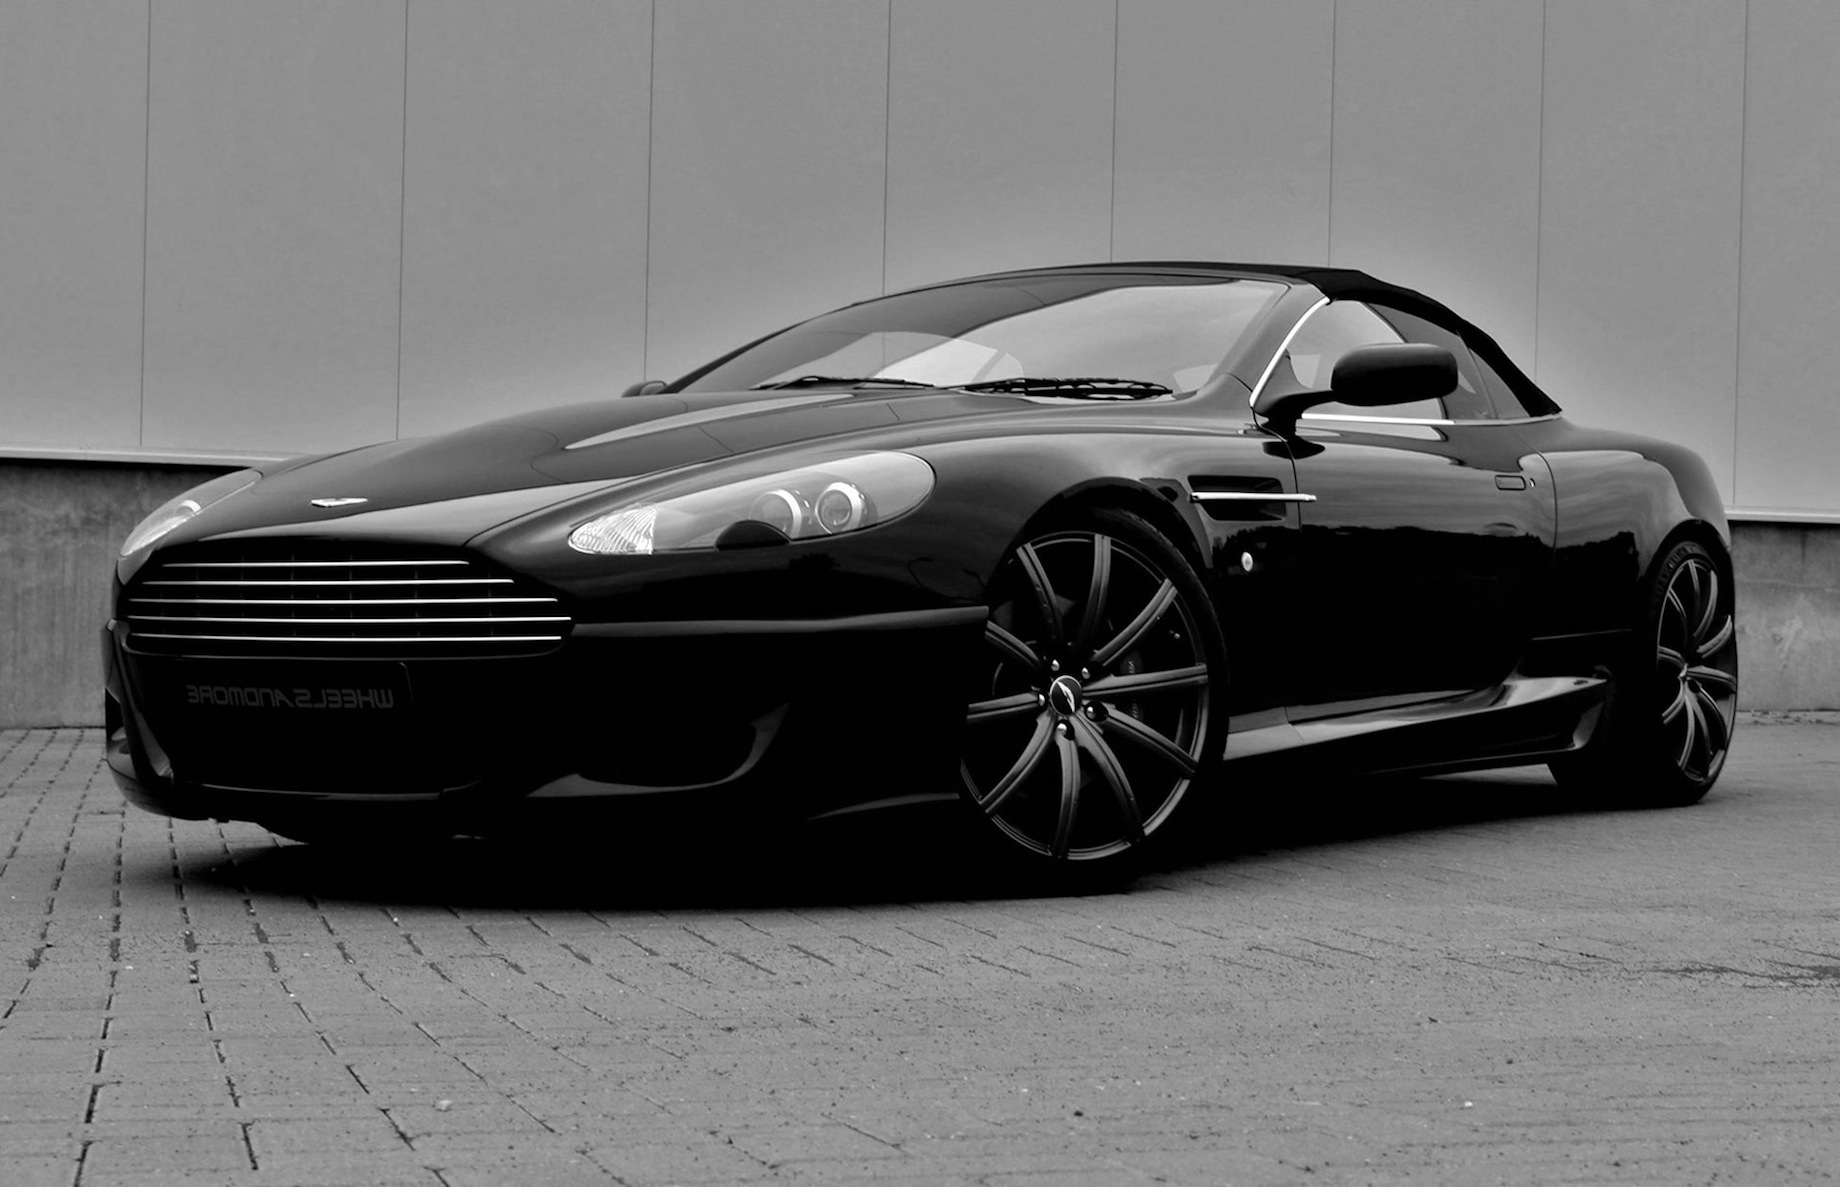 Does ford own part of aston martin #7